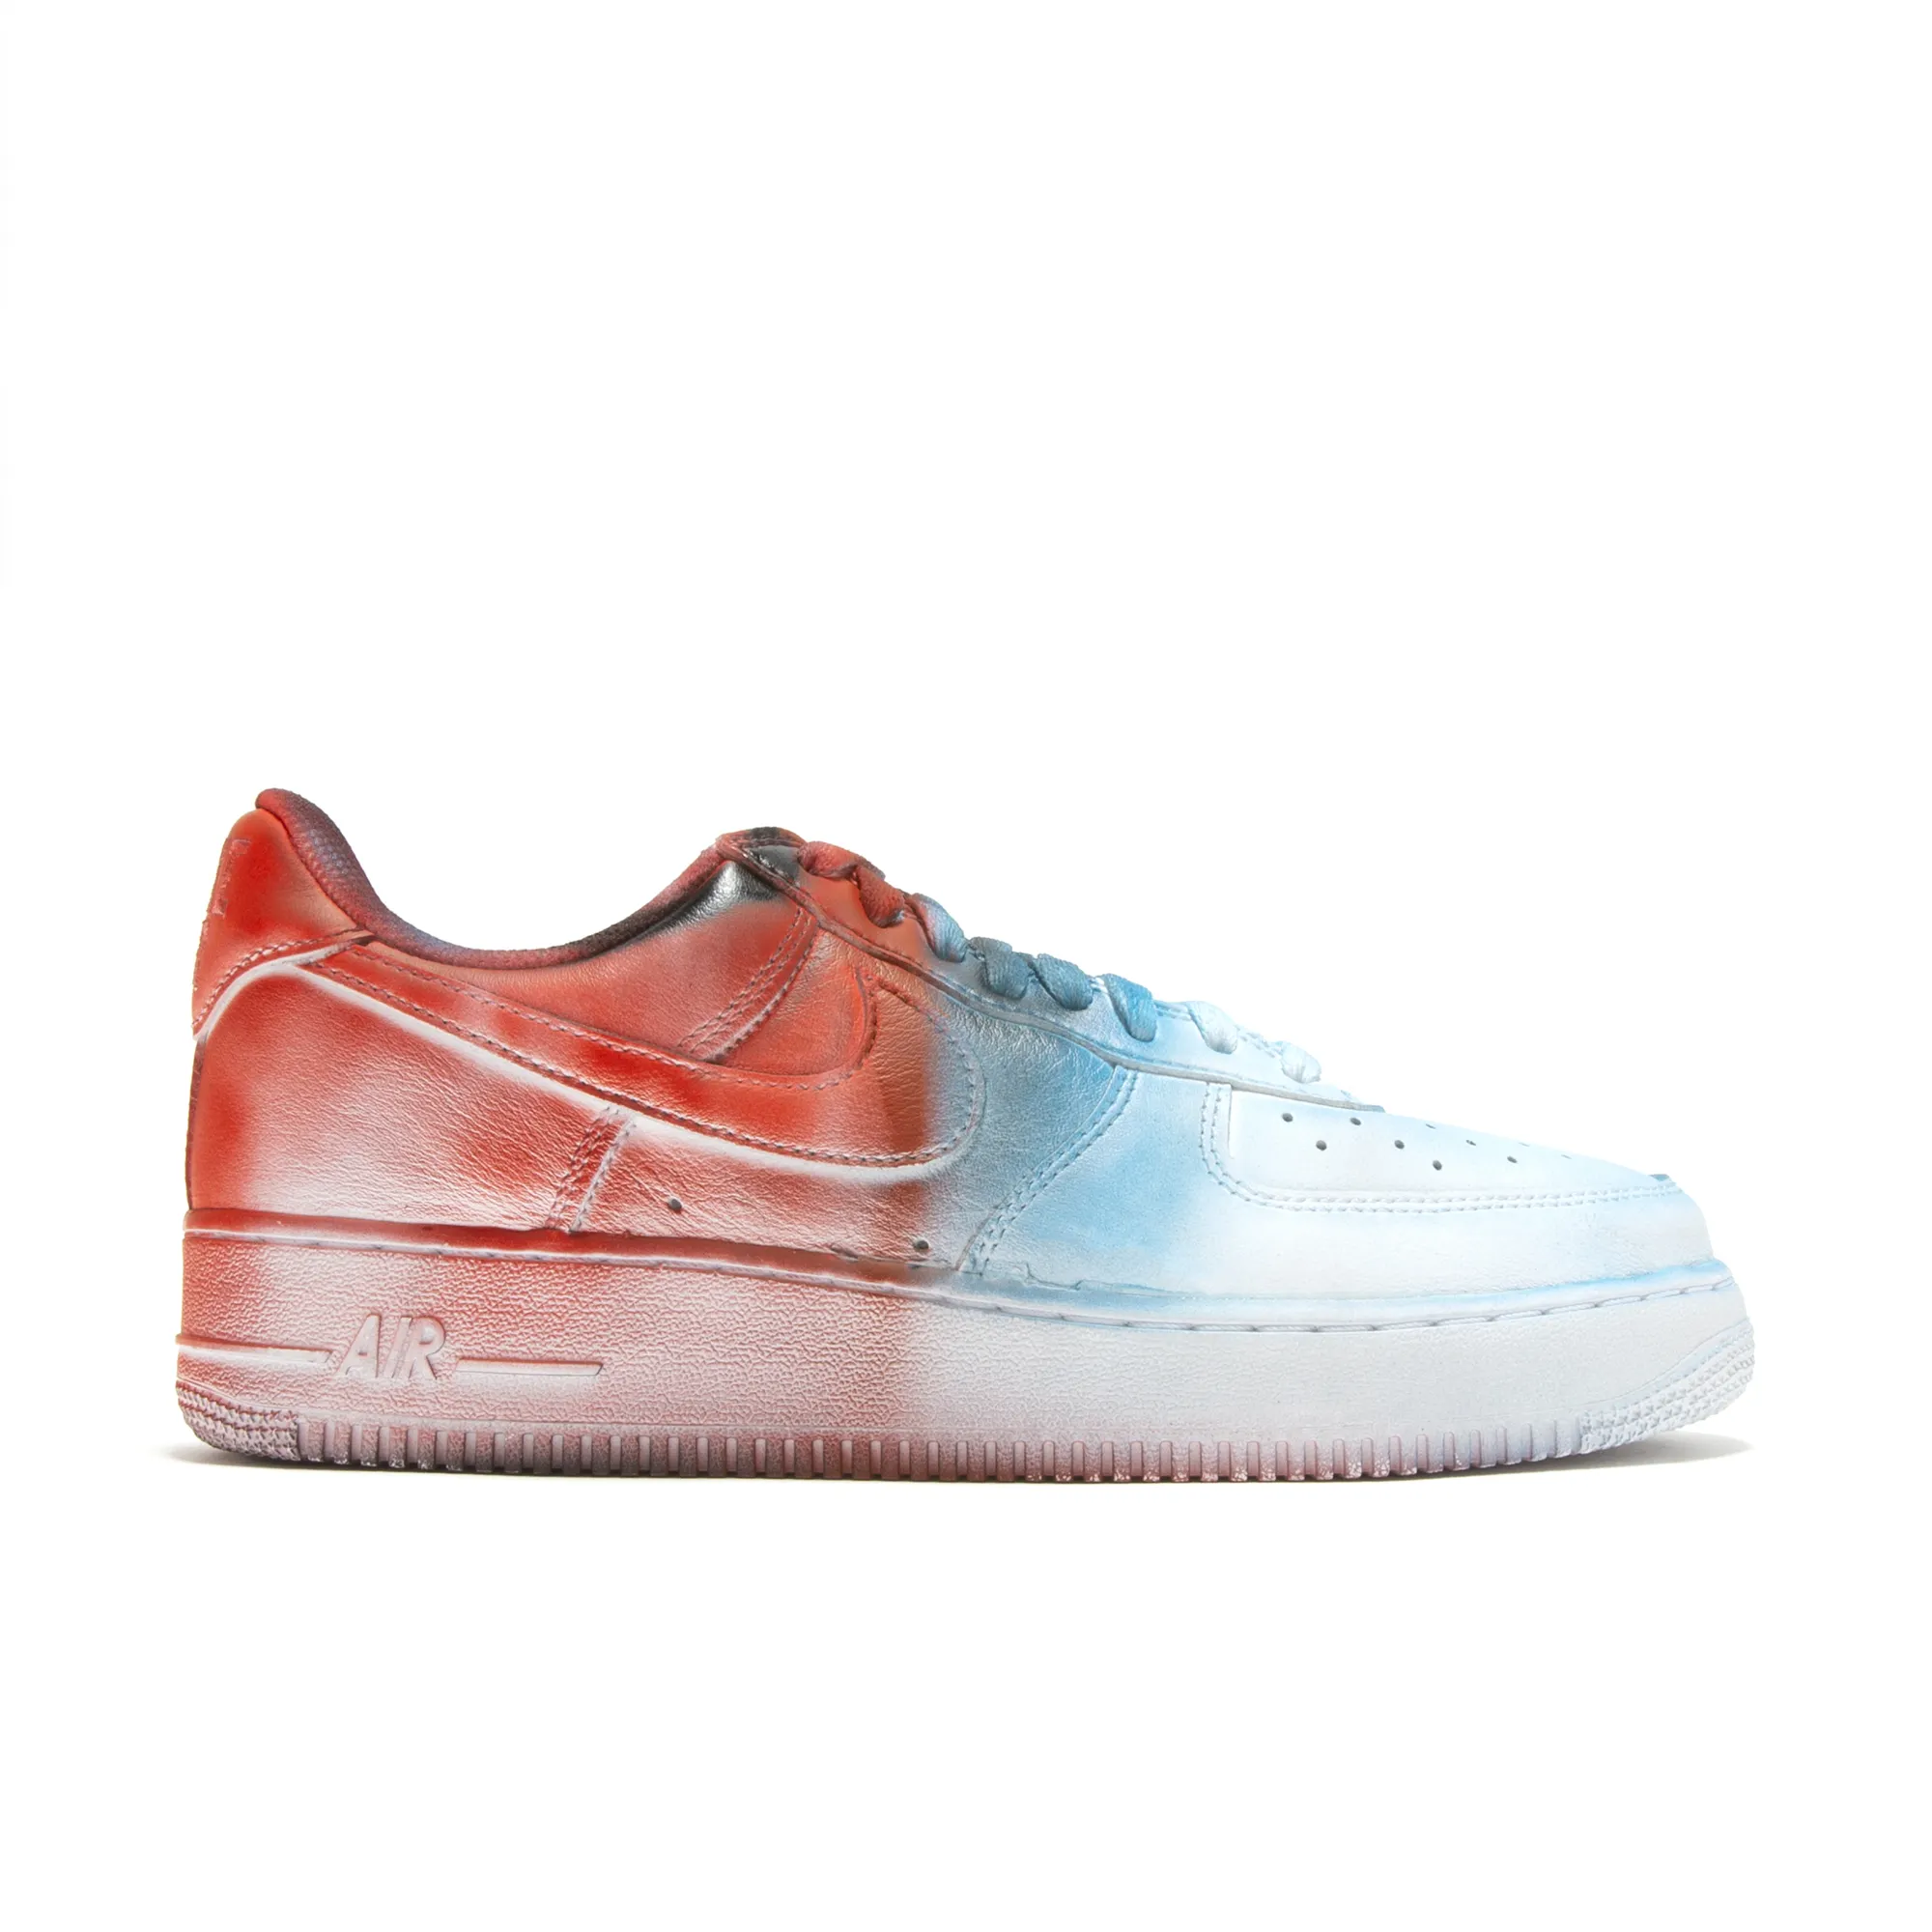 UNION TOKYOにて「Custom painted AIR FORCE 1 by RYOTA DAIMON」を抽選にてプレゼント (ユニオン エア フォース 1)